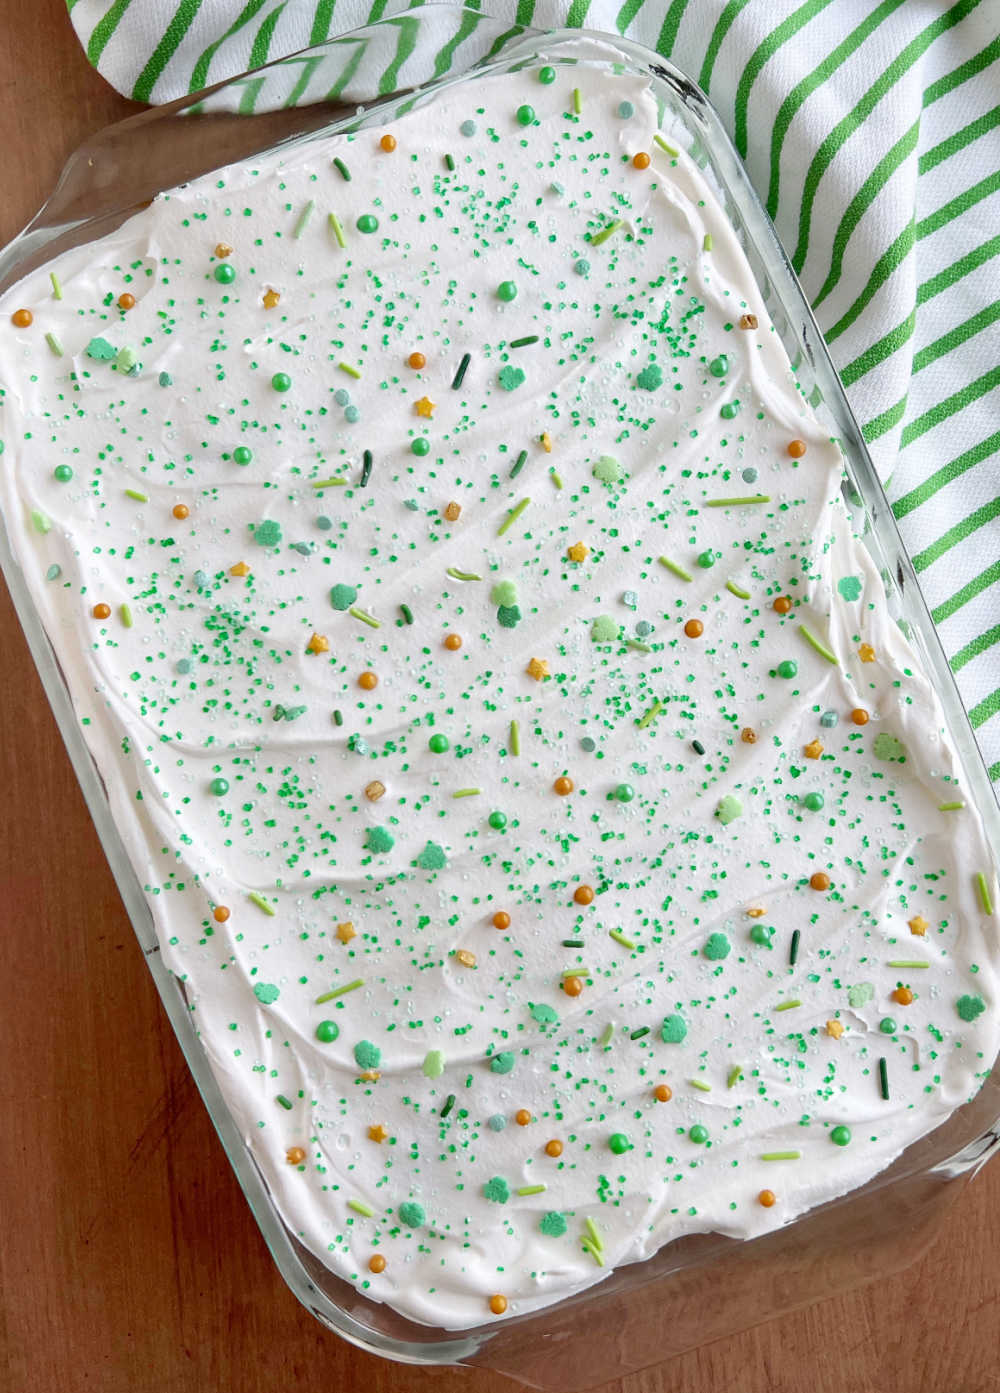 lime jello cake in baking dish with St. Patrick's day sprinkles on top